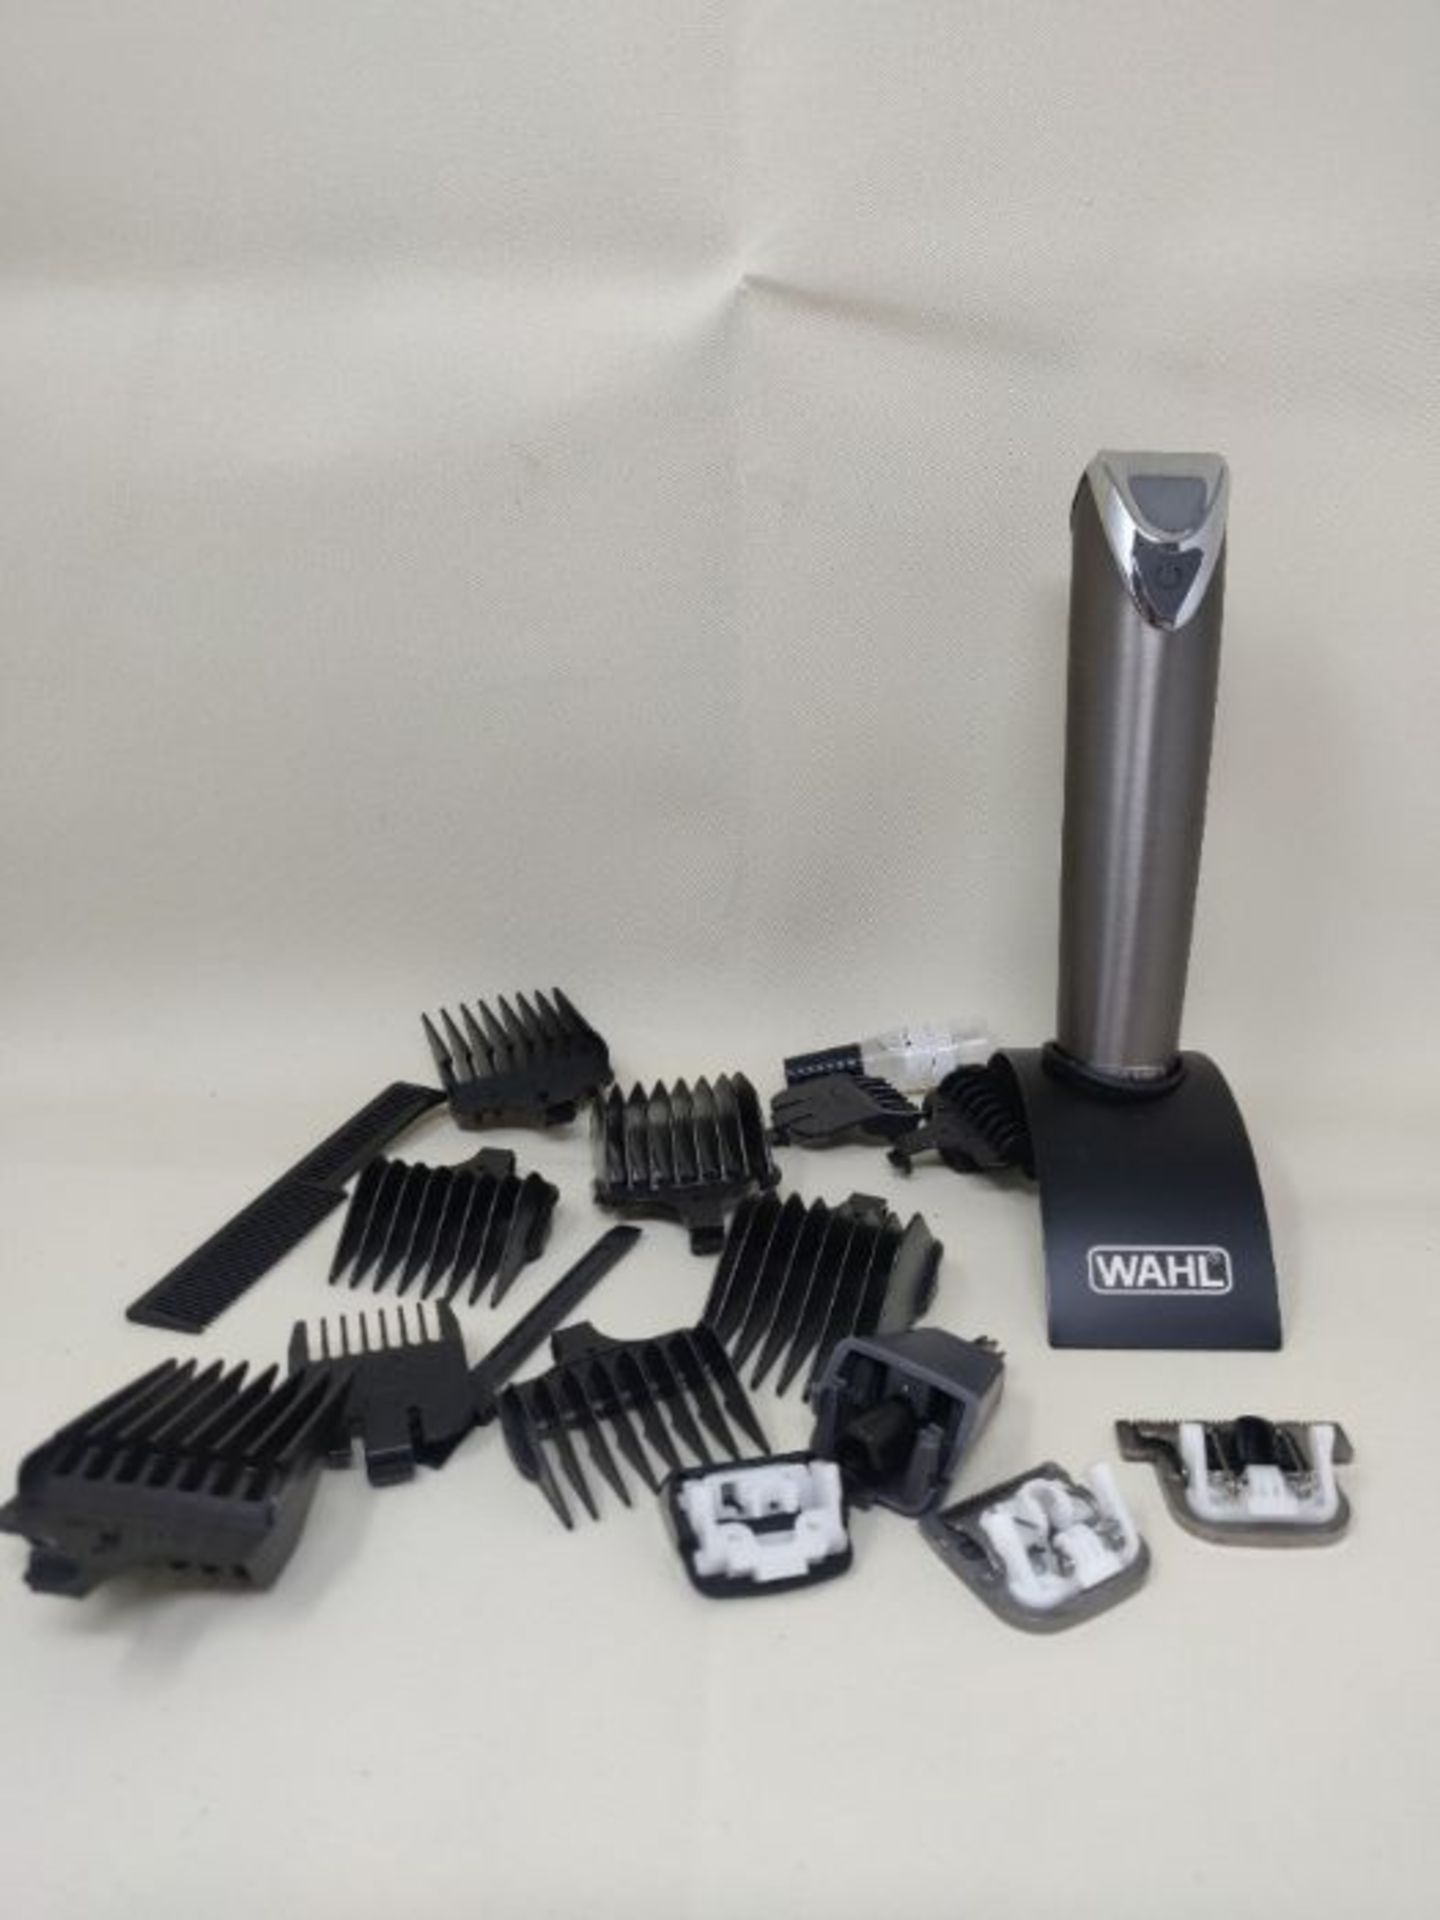 RRP £94.00 [INCOMPLETE] WAHL Multigroomer, Black Stainless Steel, Cordless, Rechargeable, Fully W - Image 3 of 3